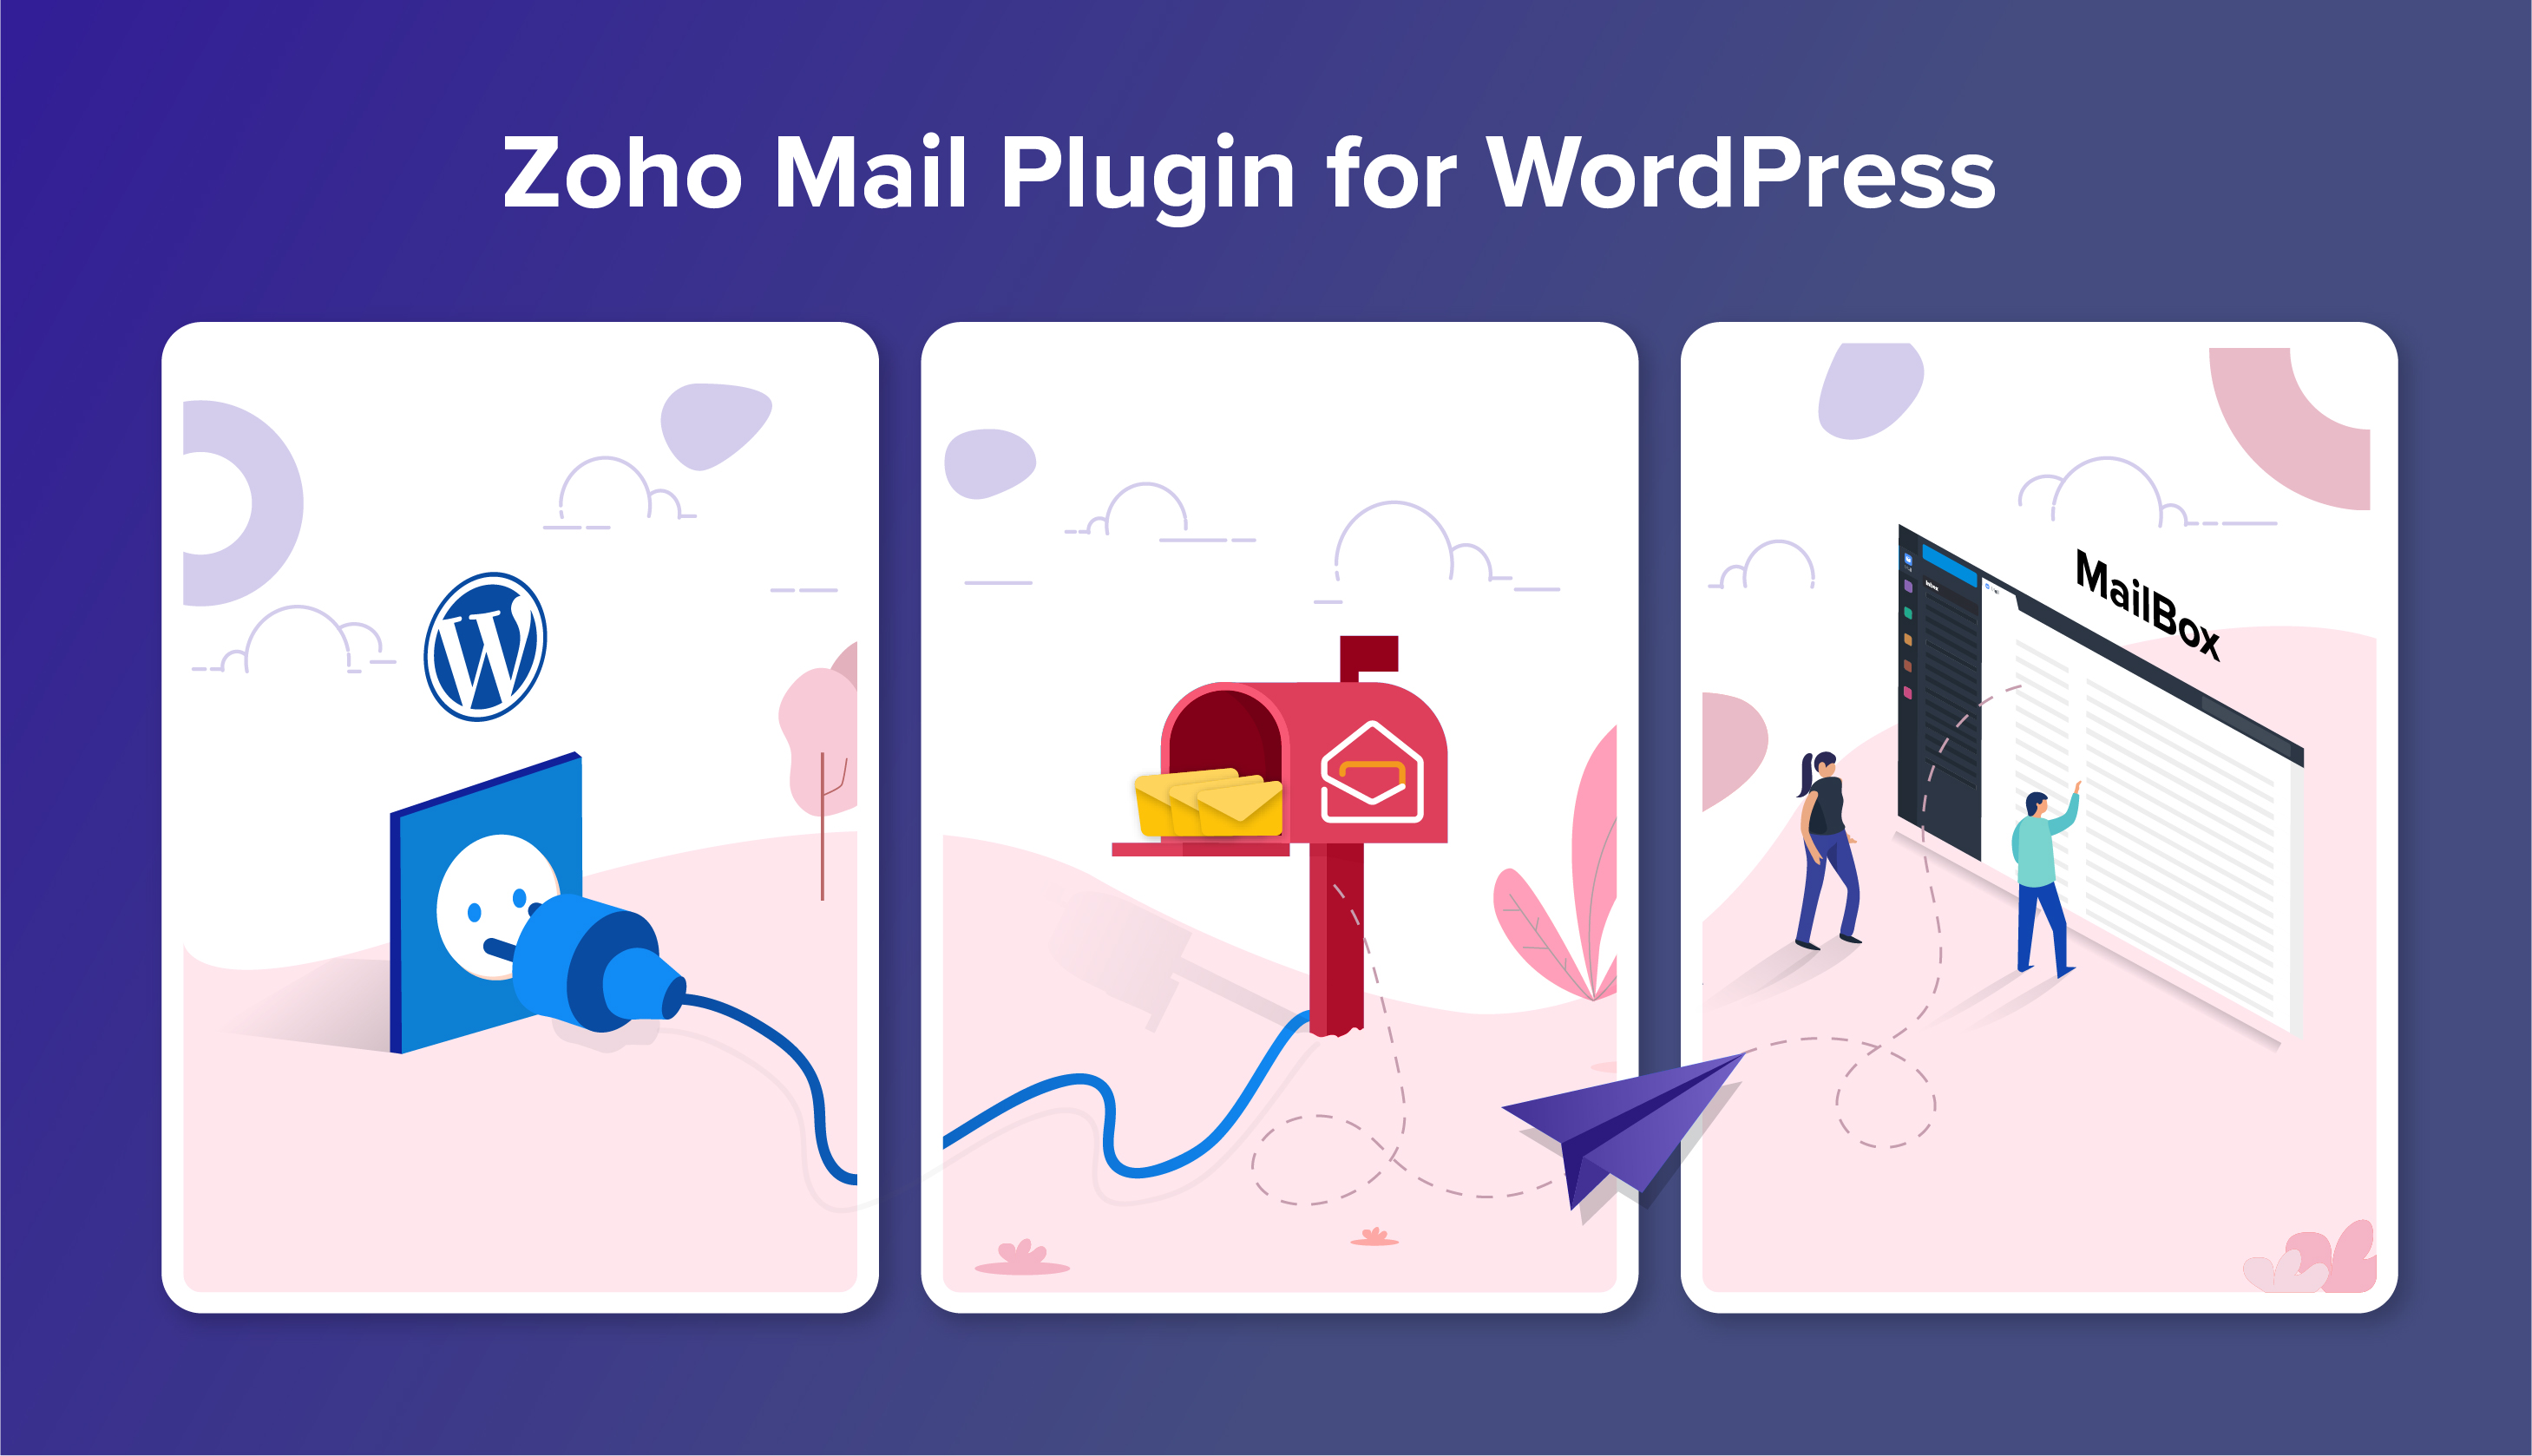 Zoho Mail Plugin for WordPress—sending authentic emails from your website